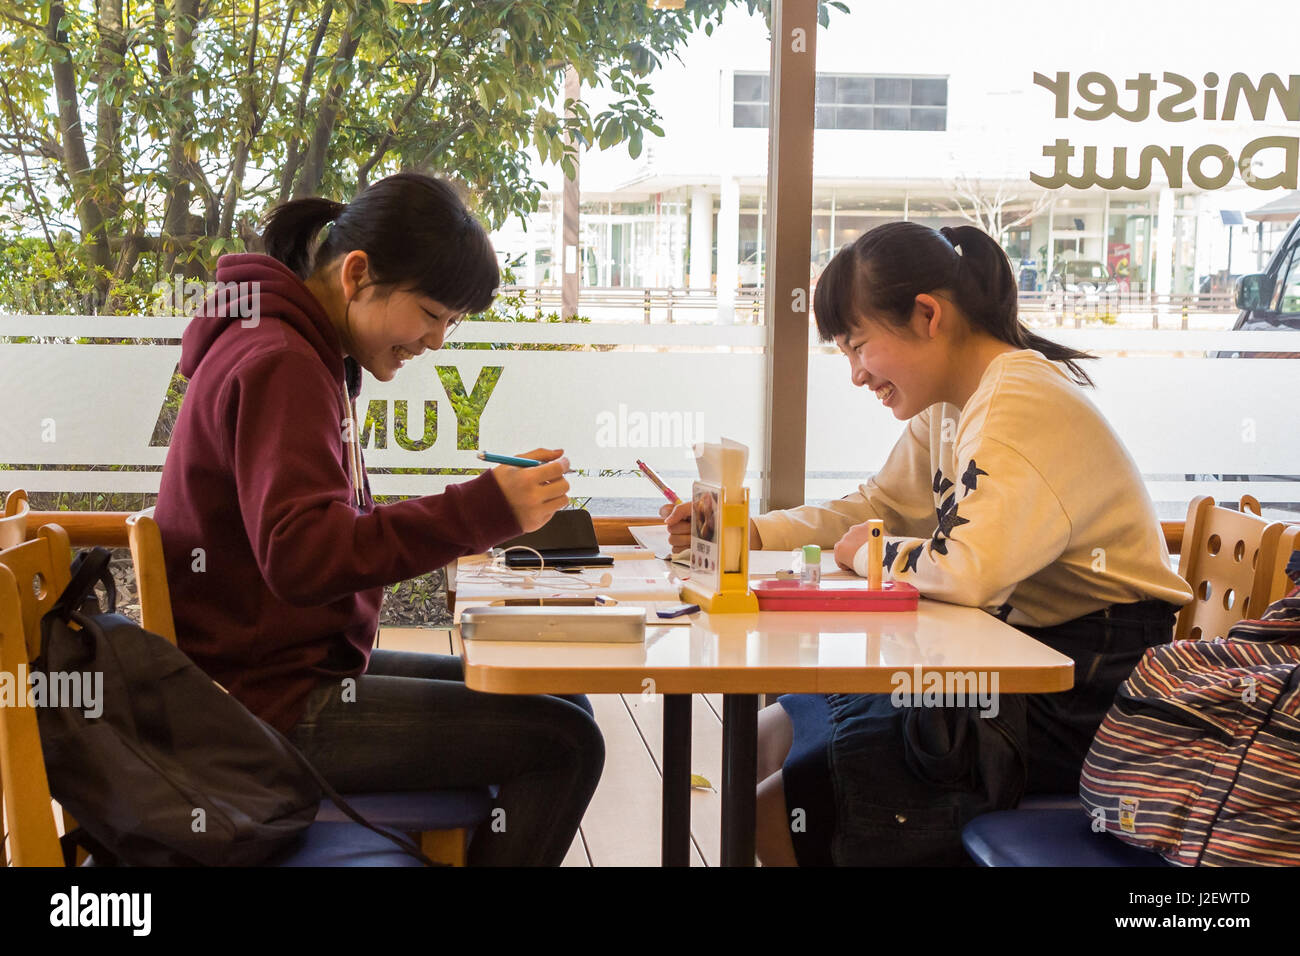 Kanazawa, Japan - March 30th, 2017: Japanese students girls sitting inside a Mister Donut coffee shop speaking and laughing. Stock Photo